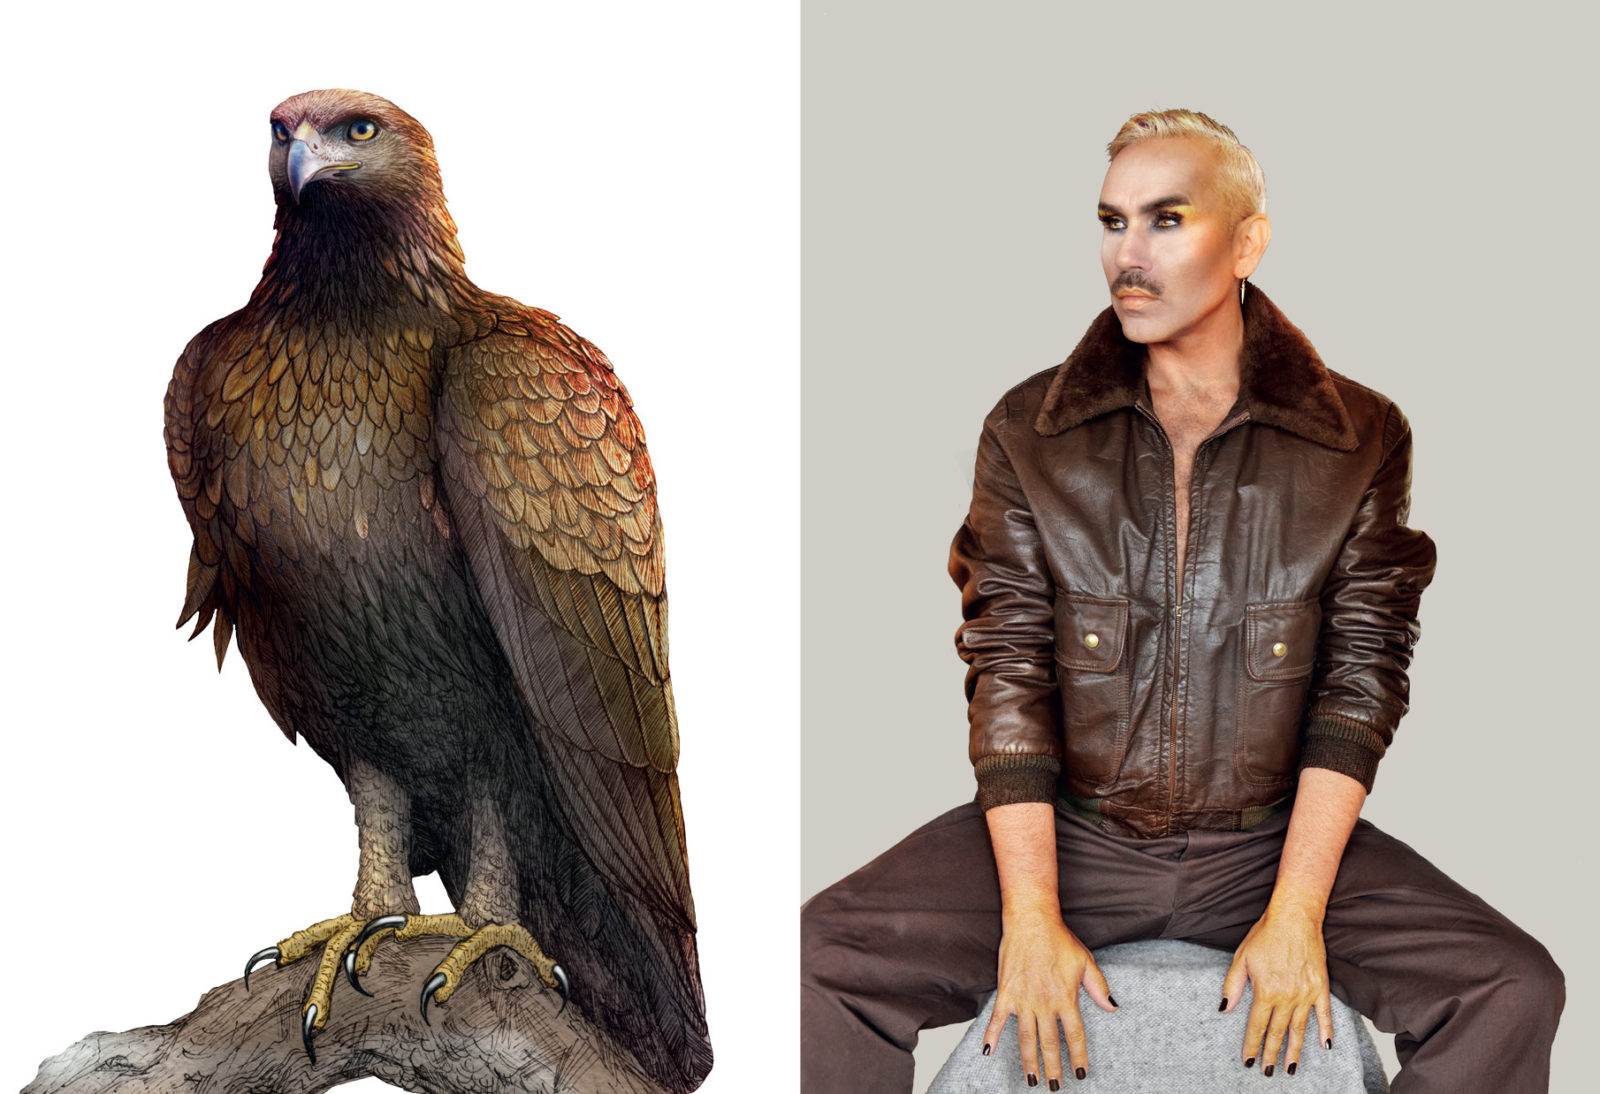 Paul Harfleet dressed up as a golden eagle, he wears brown trousers and a brown leather jacket. His hands are dusted in gold as are his cheekbones. He has Dark smoky eyeshadow on and blonde slicked back hair. Next to him is a detailed illustration of a Golden Eagle.